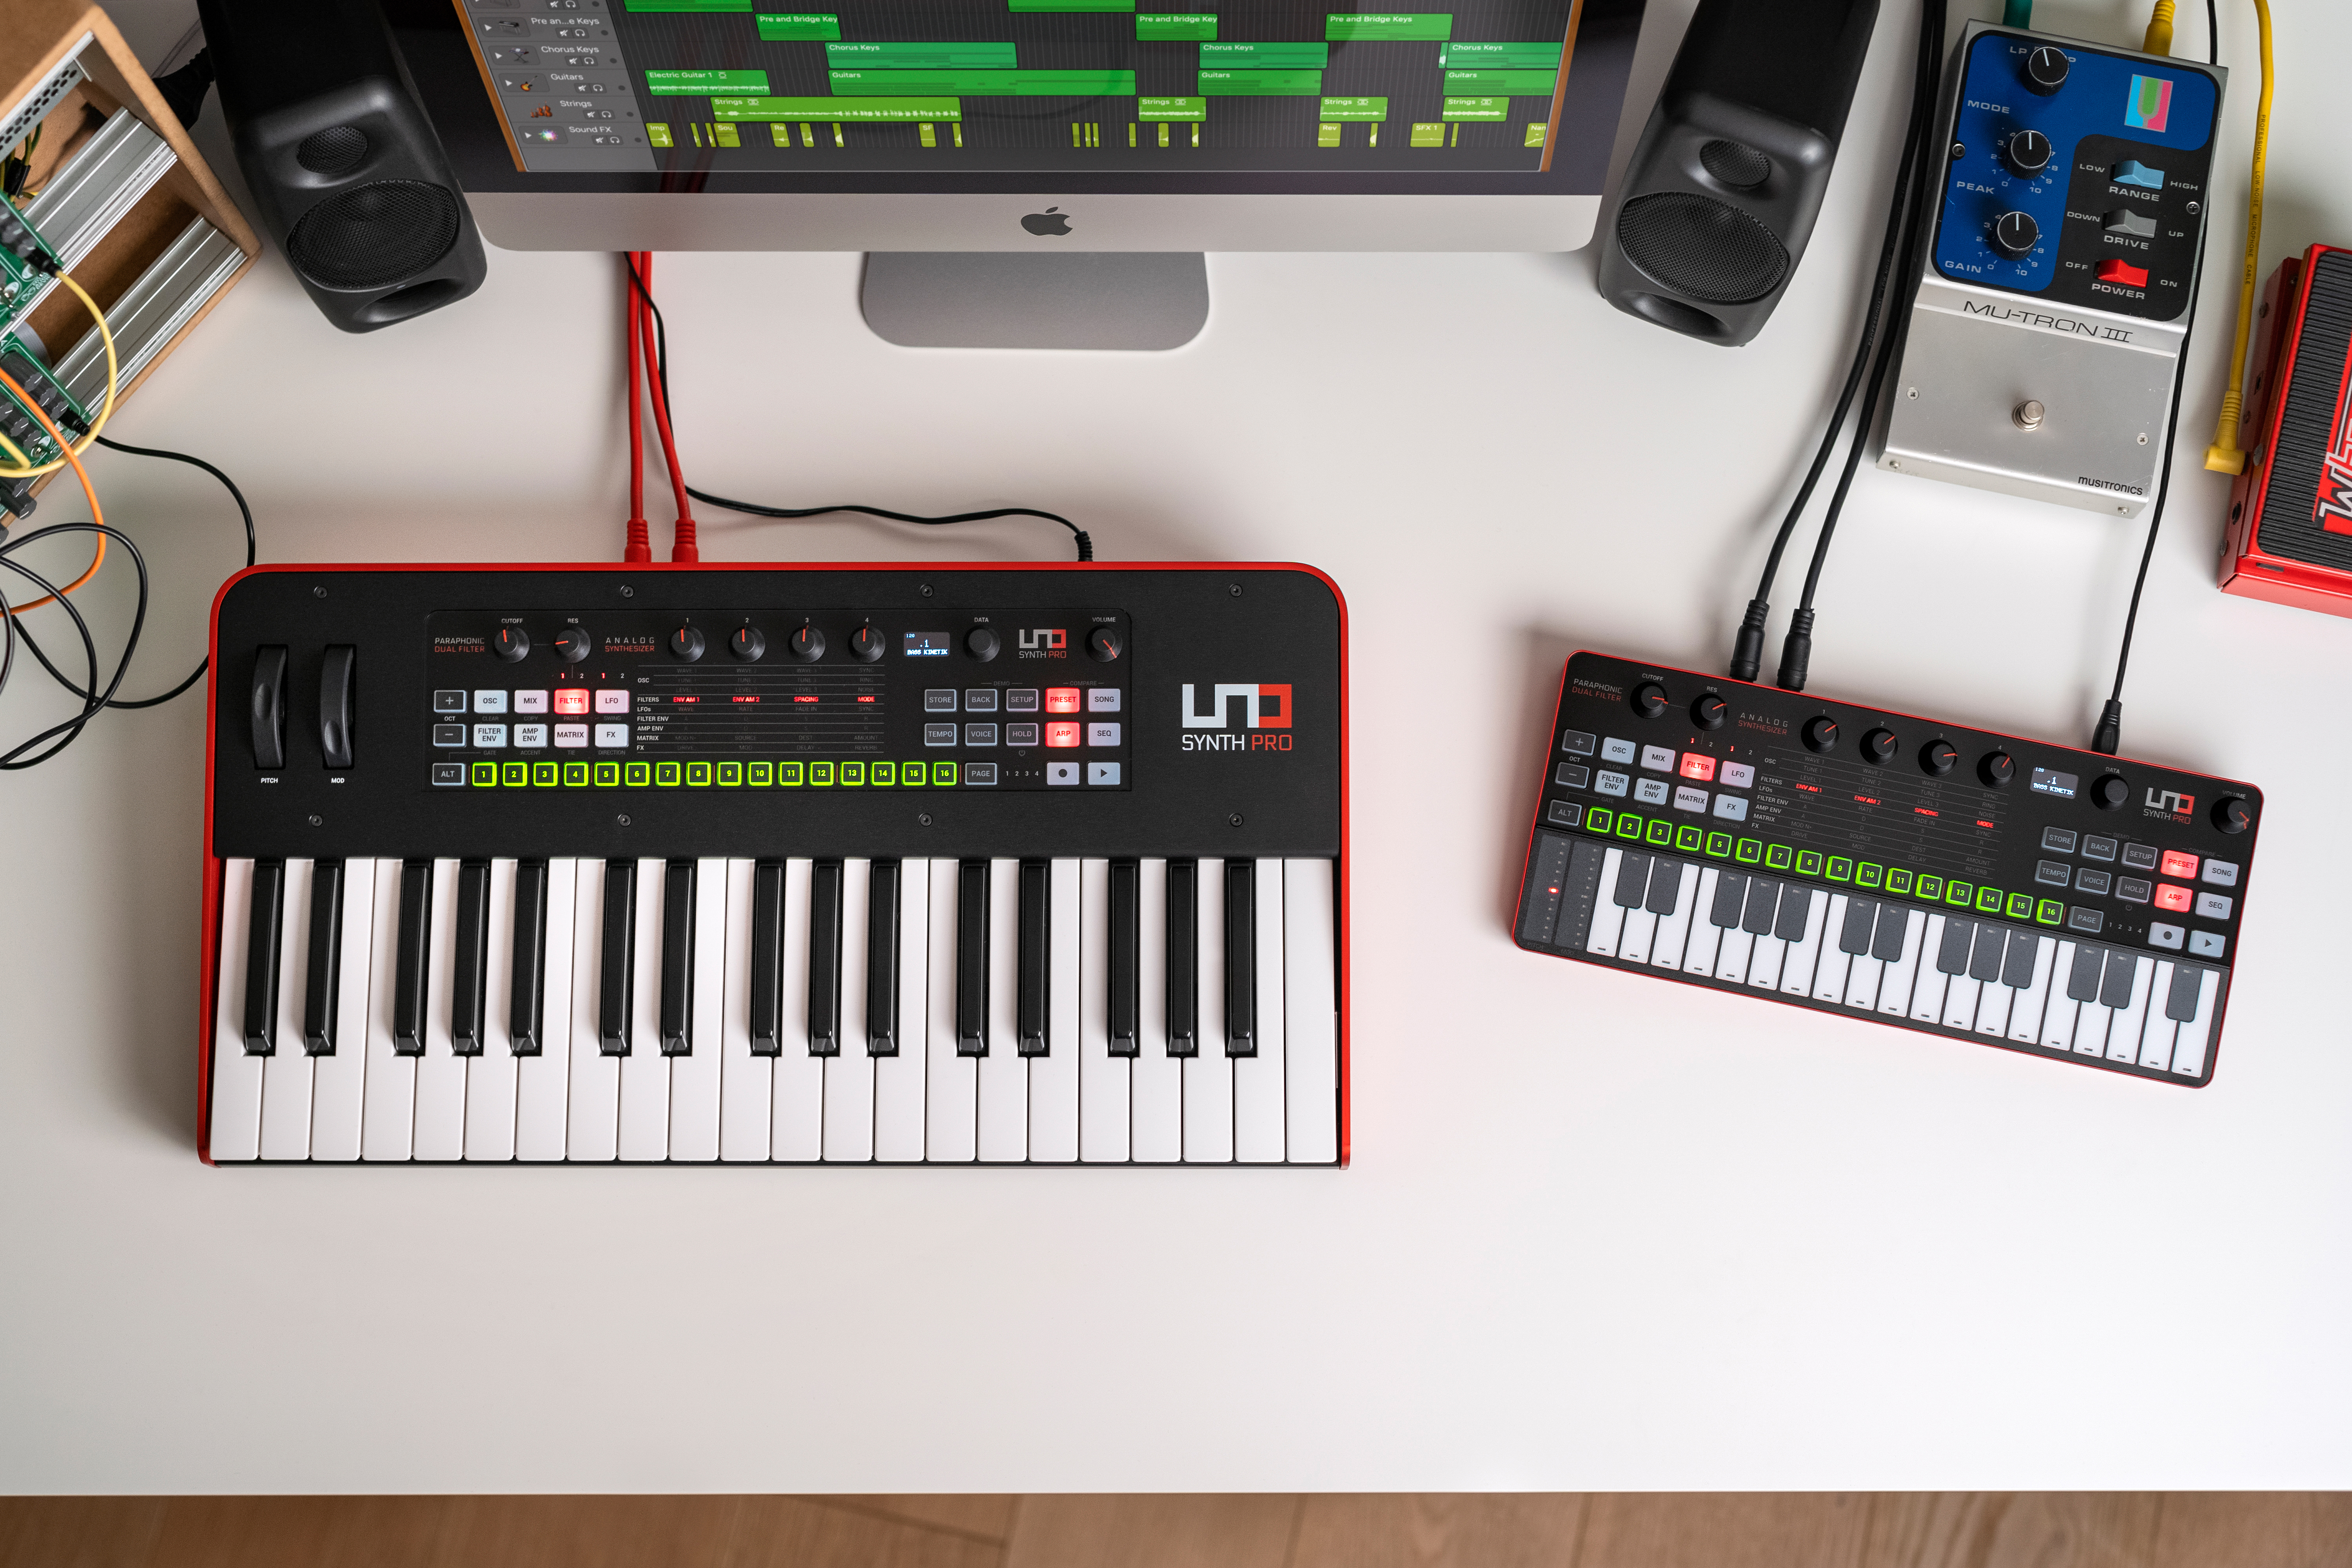 IK Multimedia UNO Synth Pro is a pro-level synthesizer starting under $400